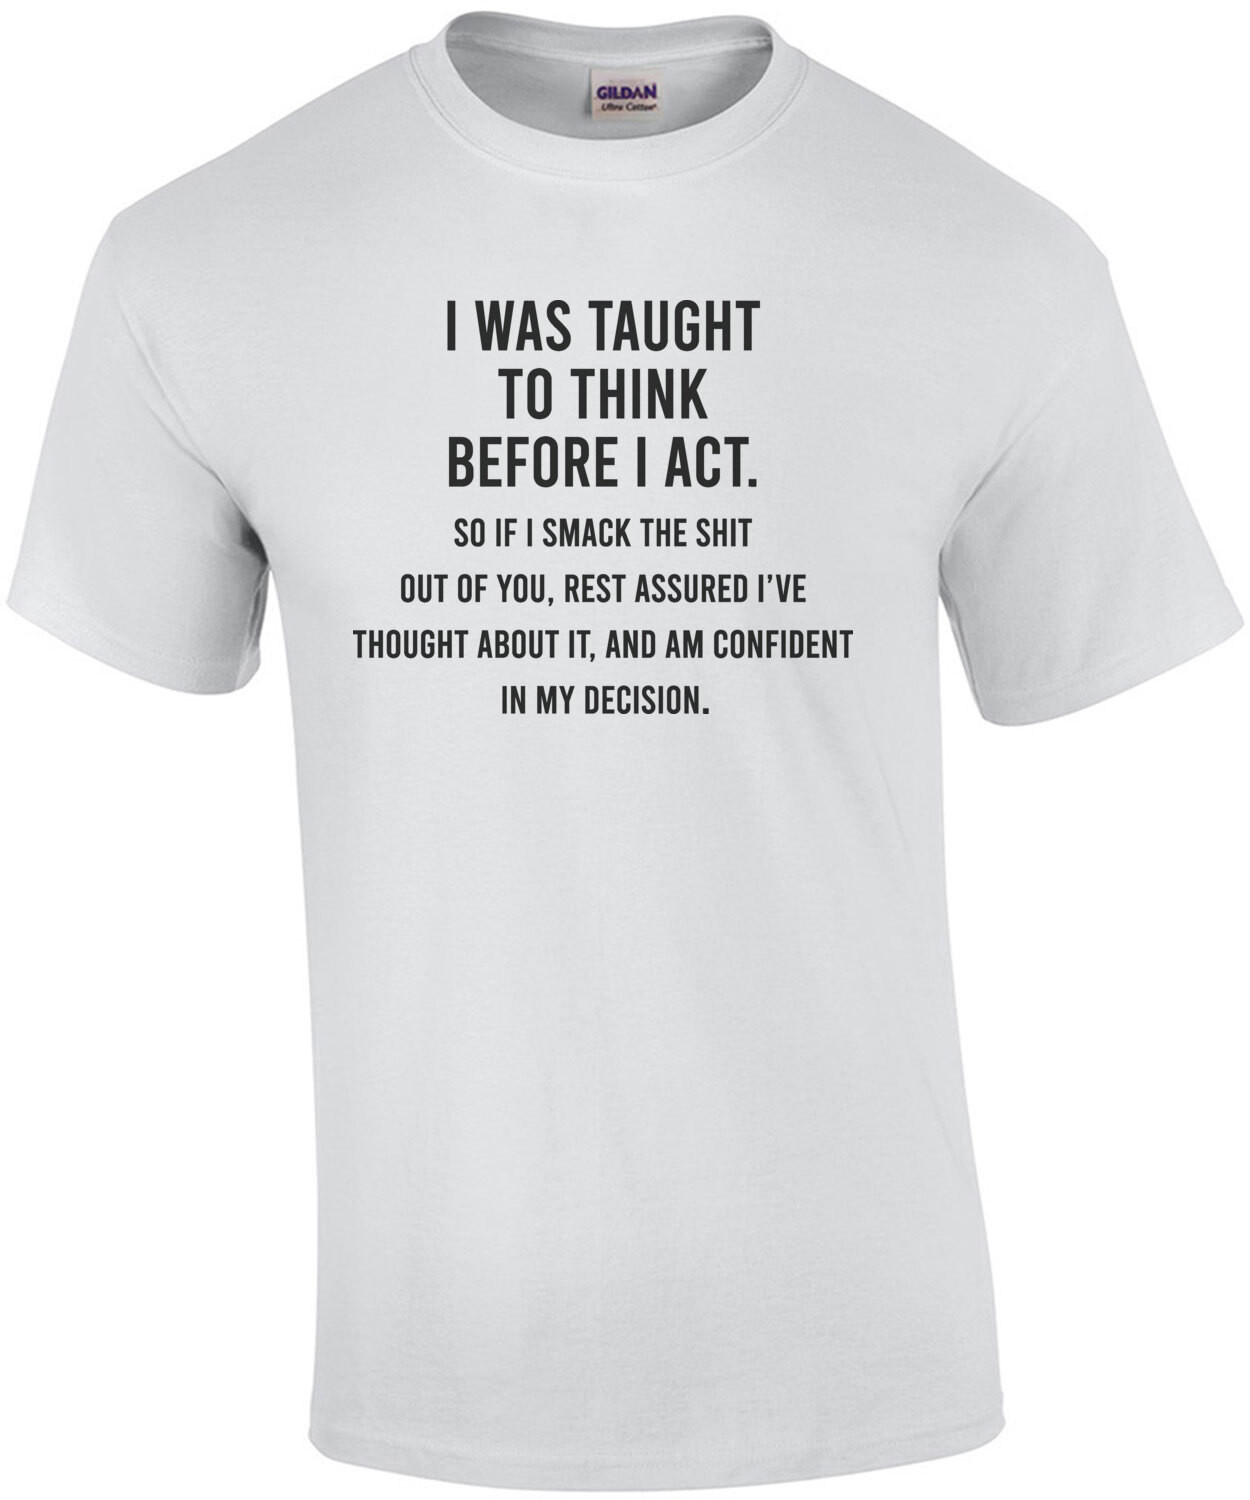 I was taught to think before I act, so if I smash the shit out of you - funny sarcastic t-shirt